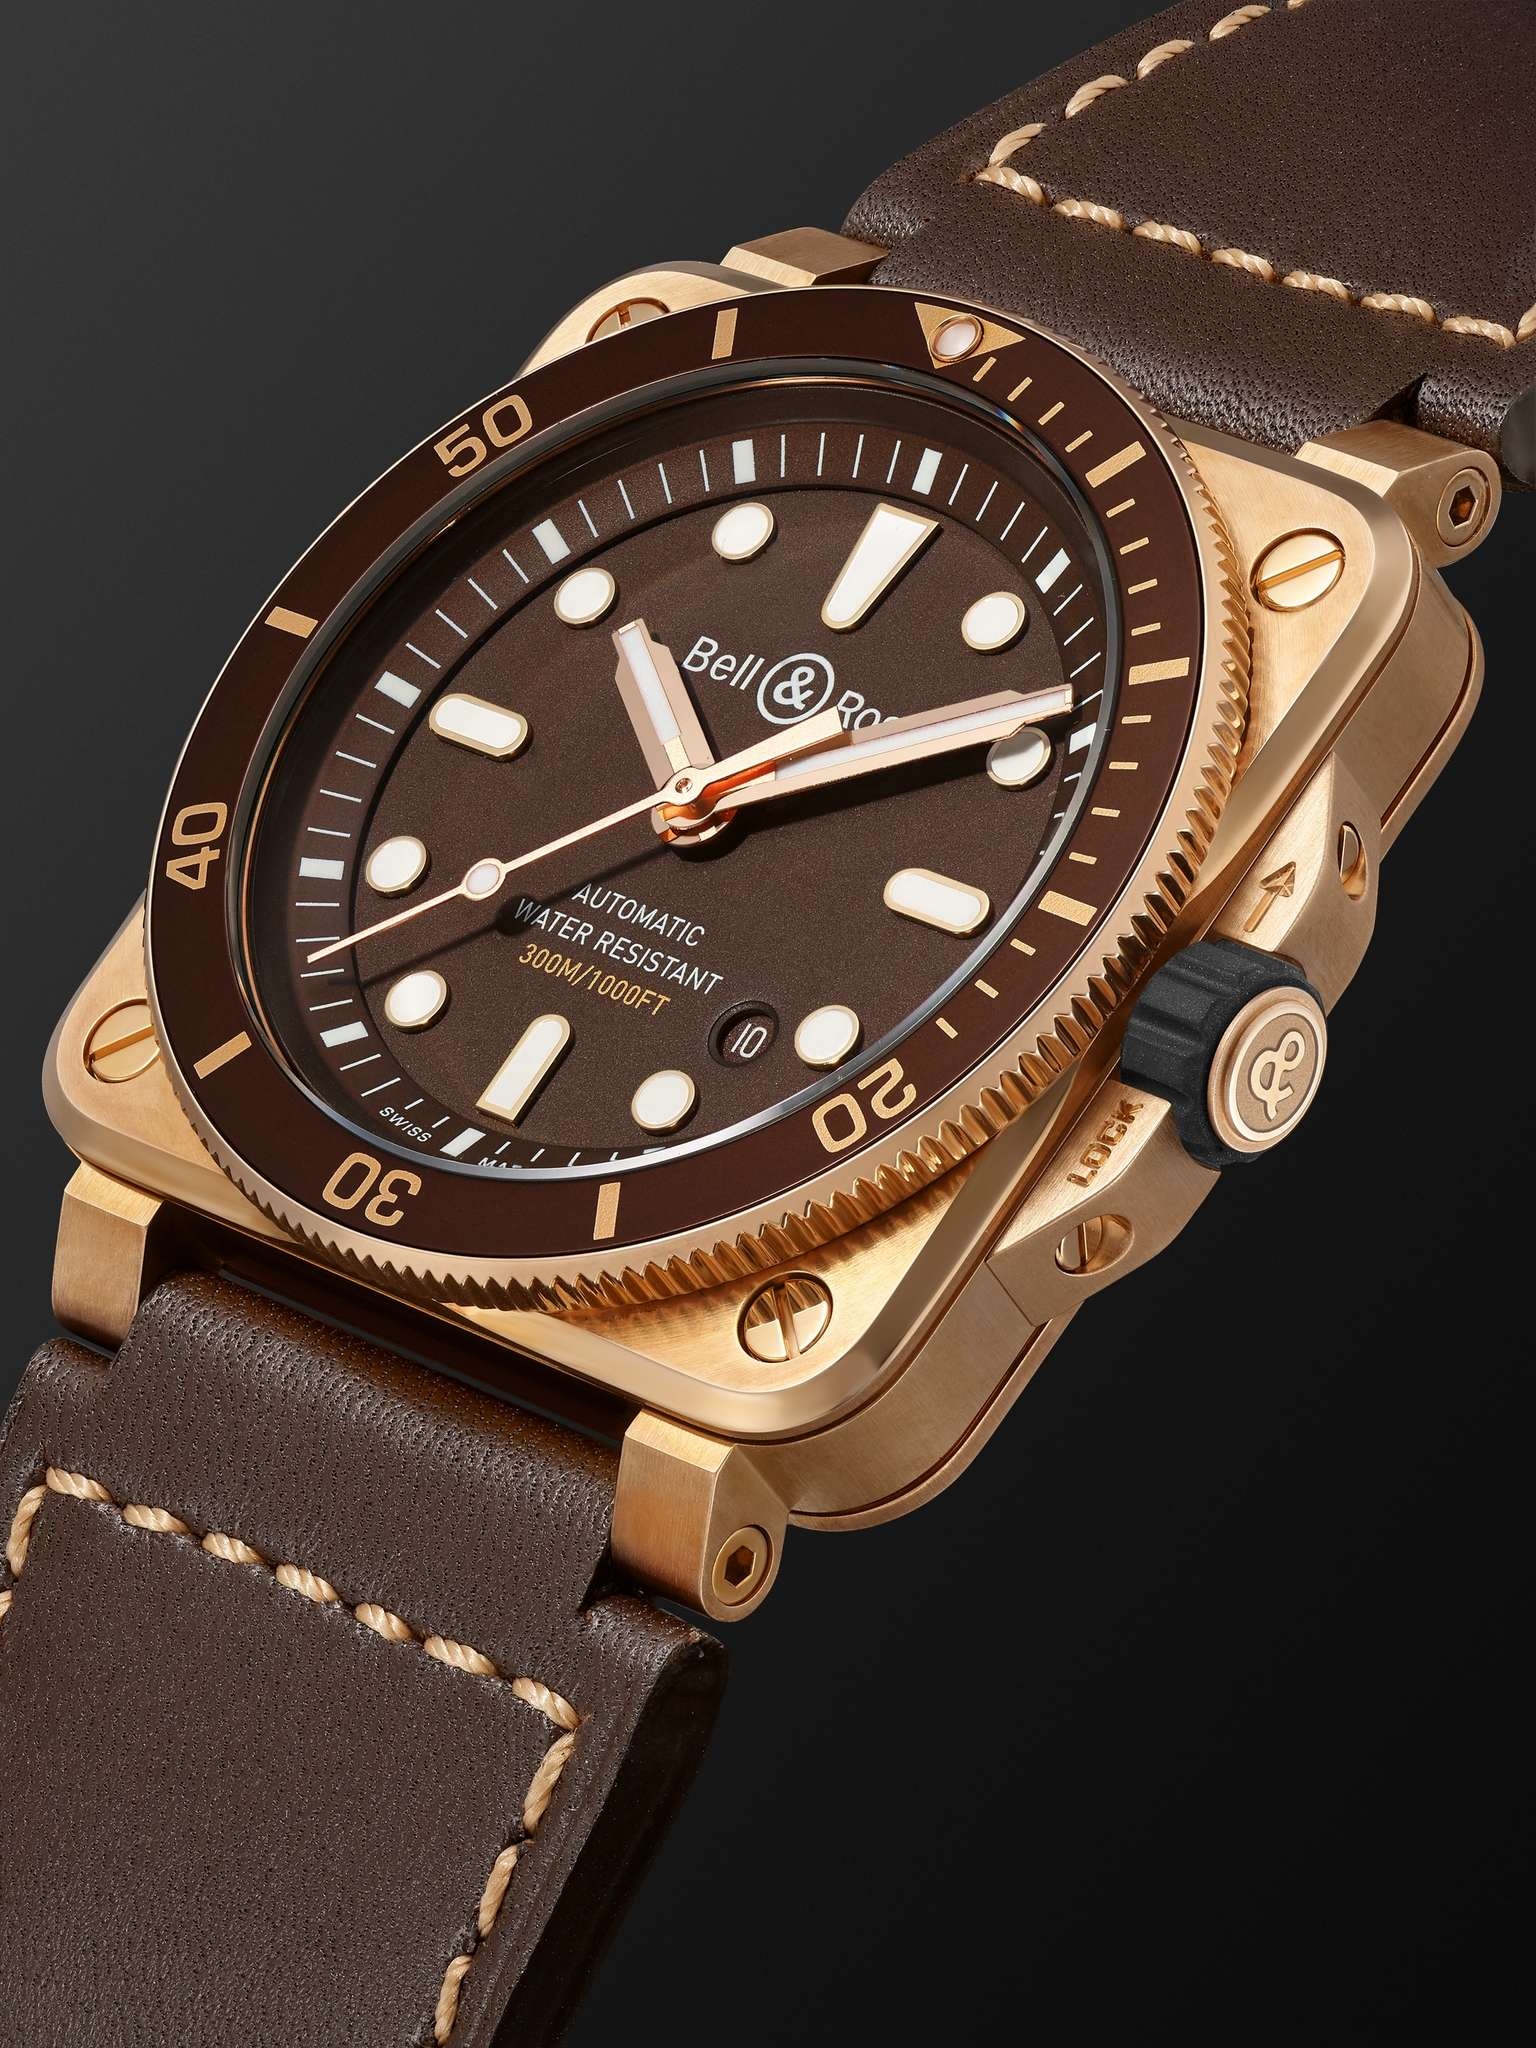 BR 03-92 Diver Limited Edition Automatic 42mm Bronze and Leather Watch, Ref.No R0392-D-BR-BR/SCA - 3